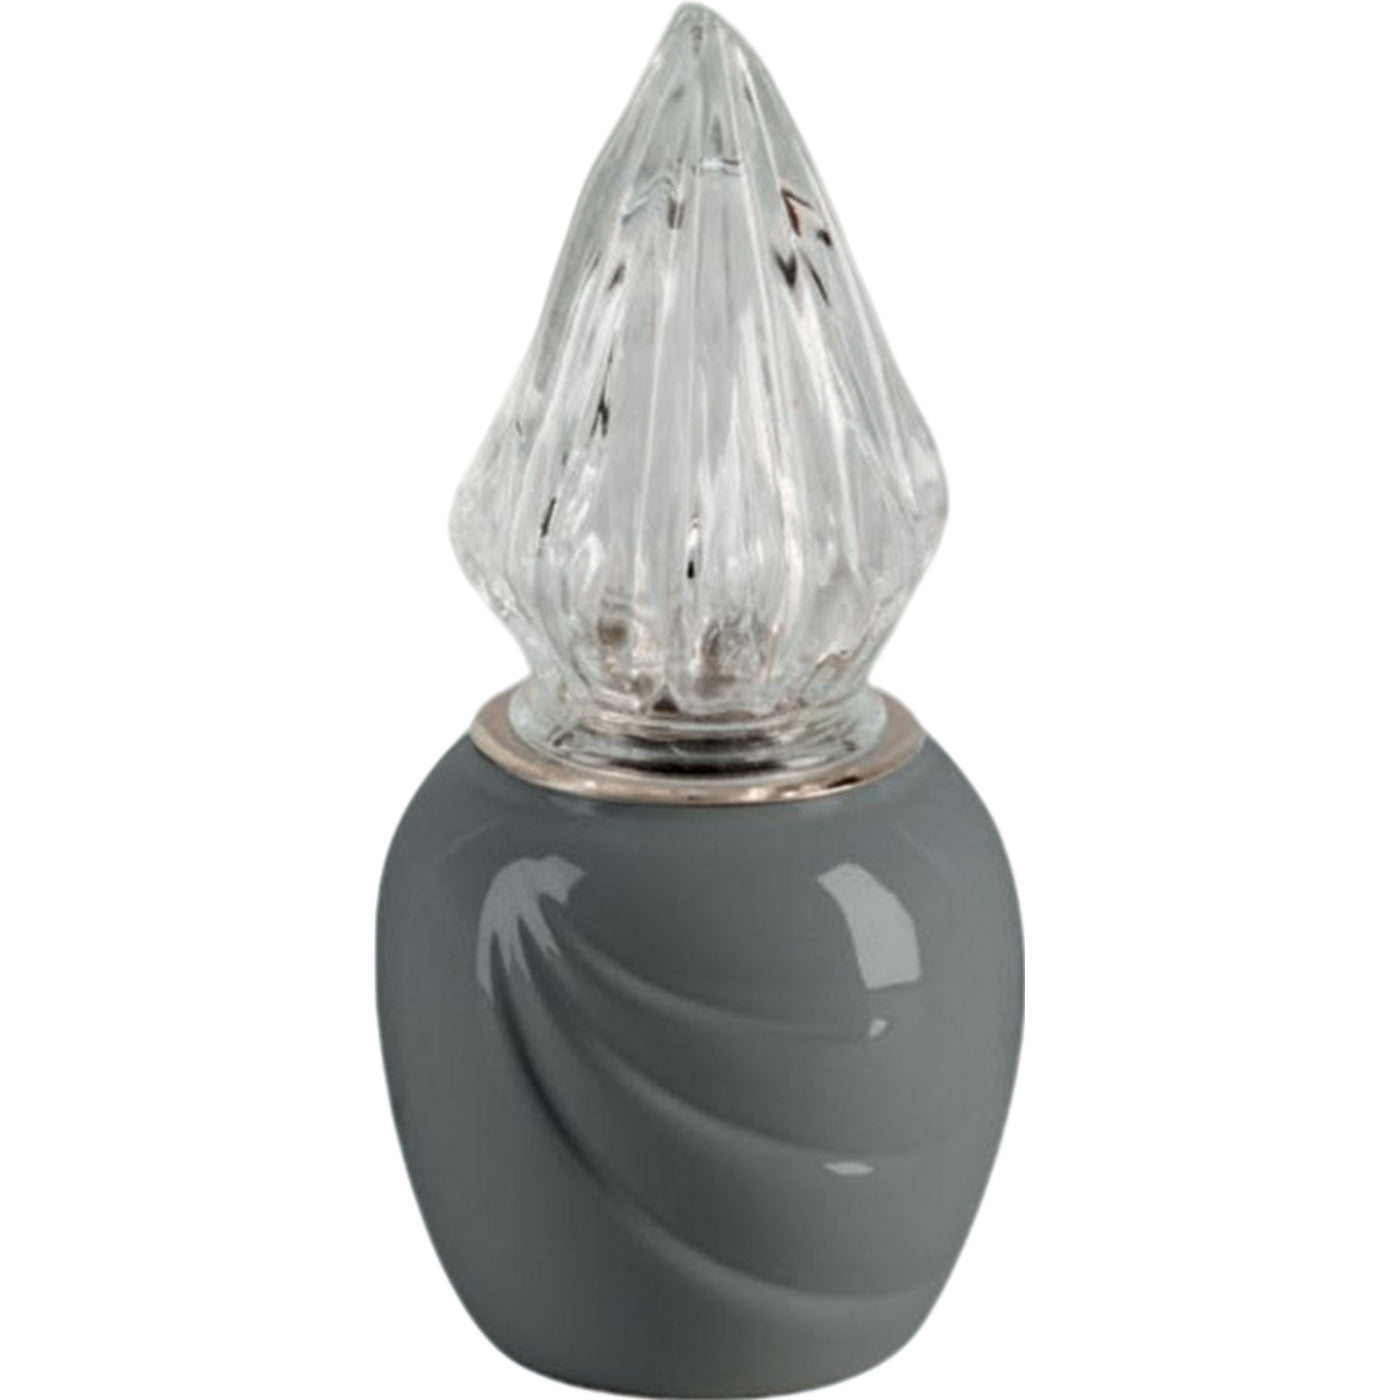 Grave light Ecotre gray 10x10cm - 3.9x3.9in In gray porcelain, wall attached ECO152P/G